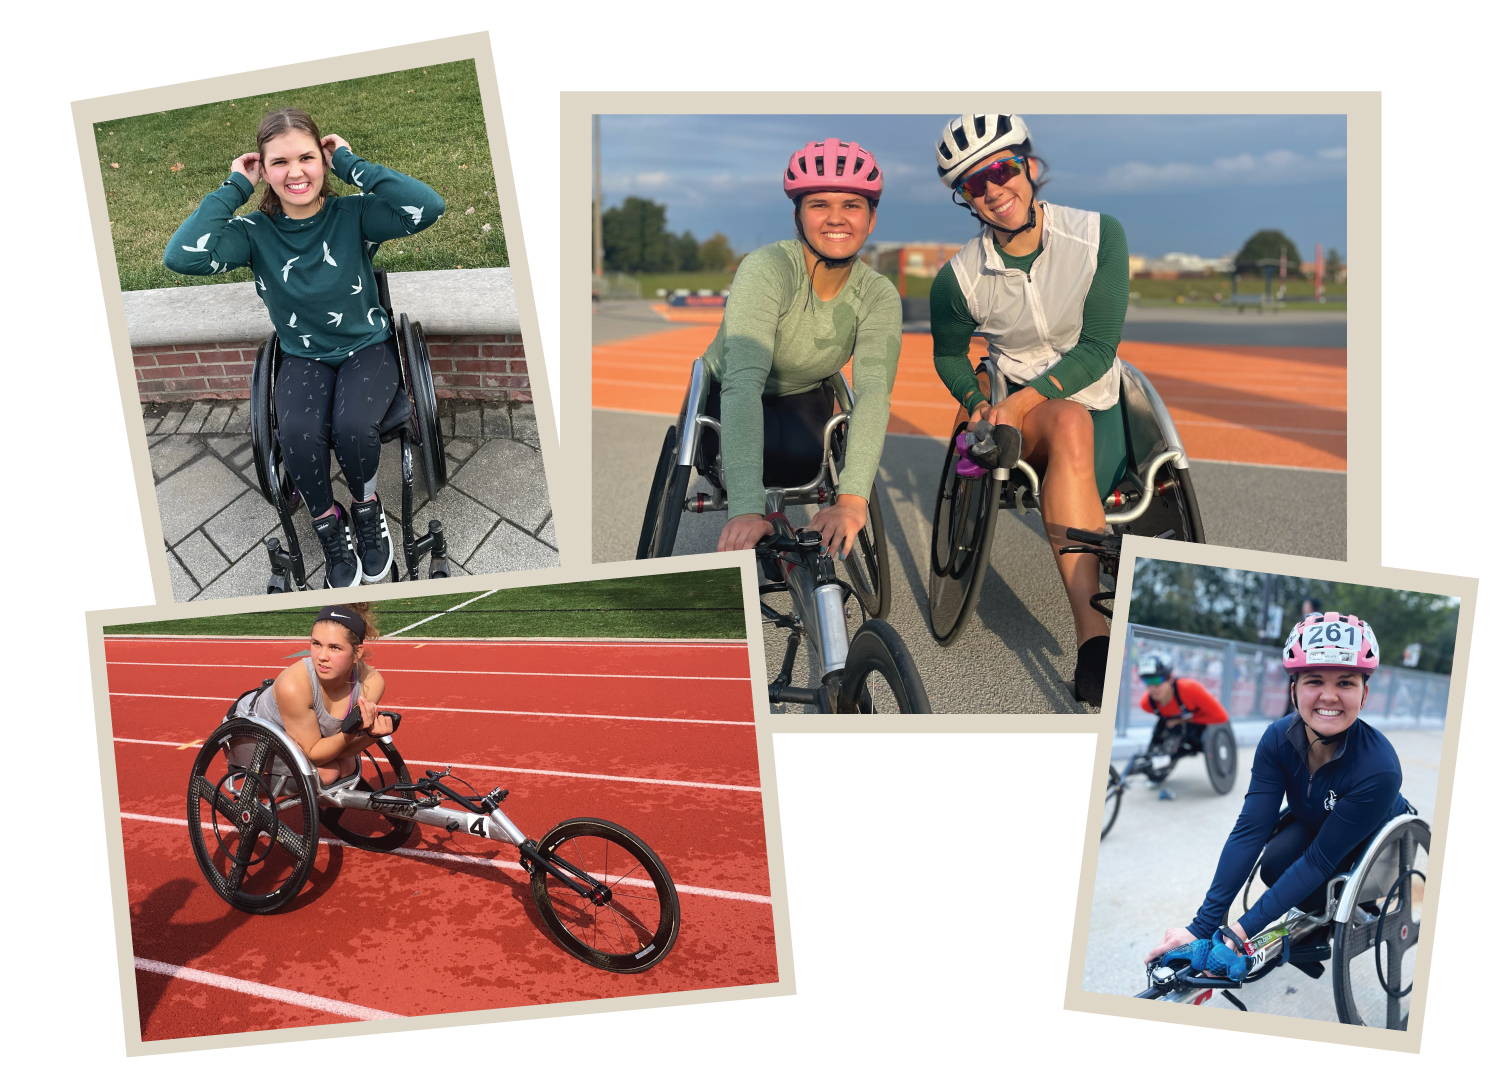 Images of Eva at practice with Jenna Fesemyer, on the track, and smiling from her racing wheelchair